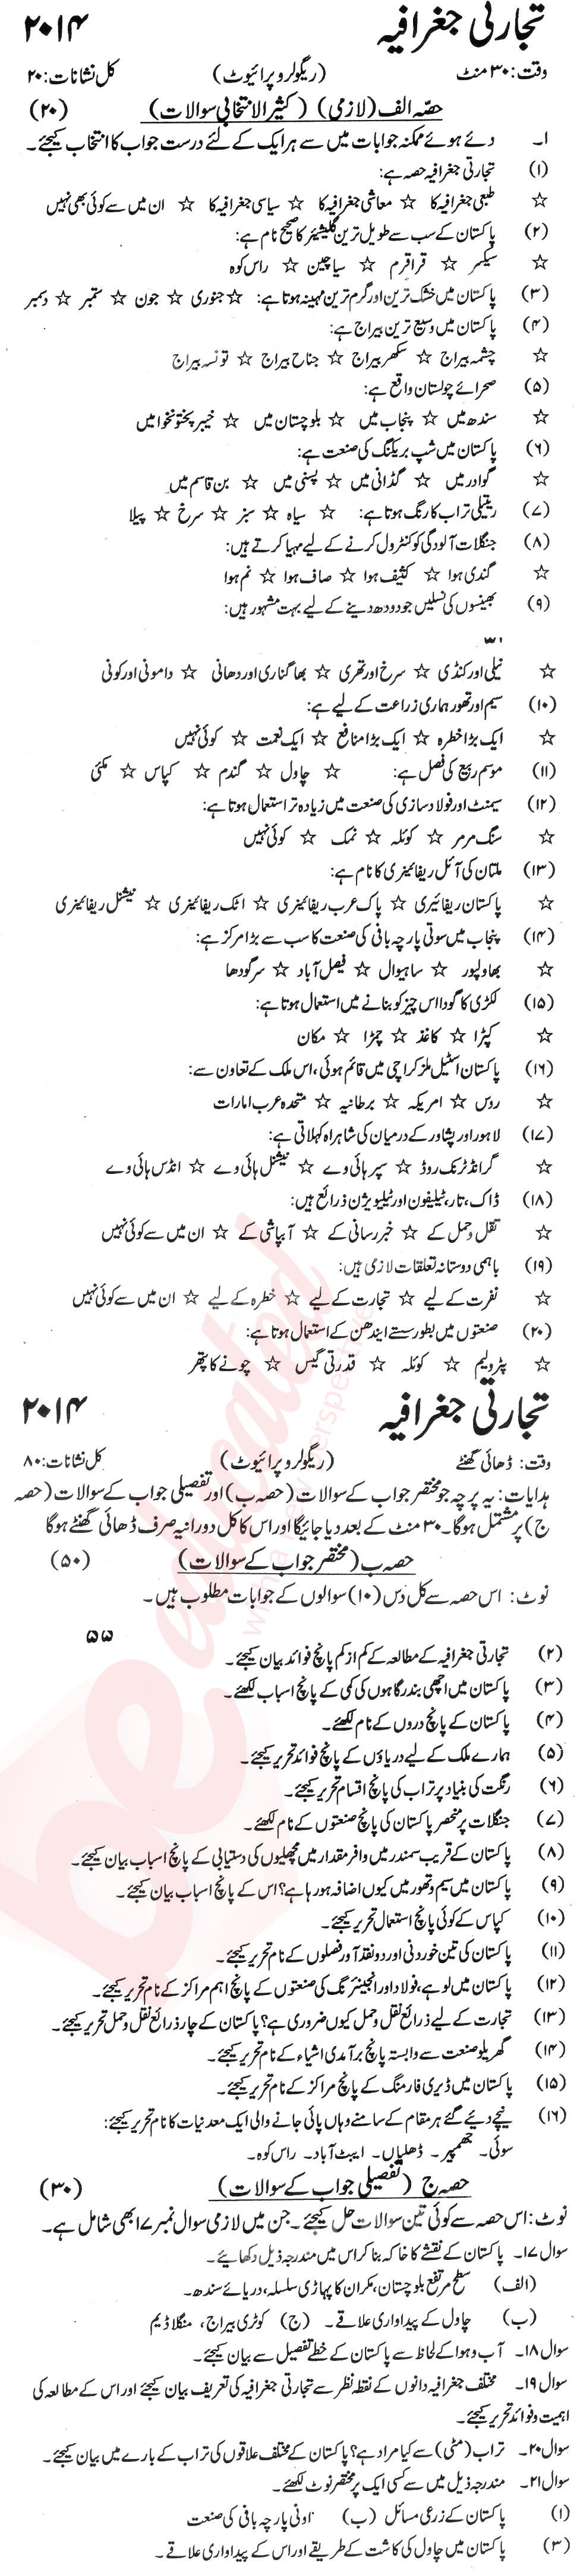 Commercial Geography 10th Urdu Medium Past Paper Group 1 KPBTE 2014